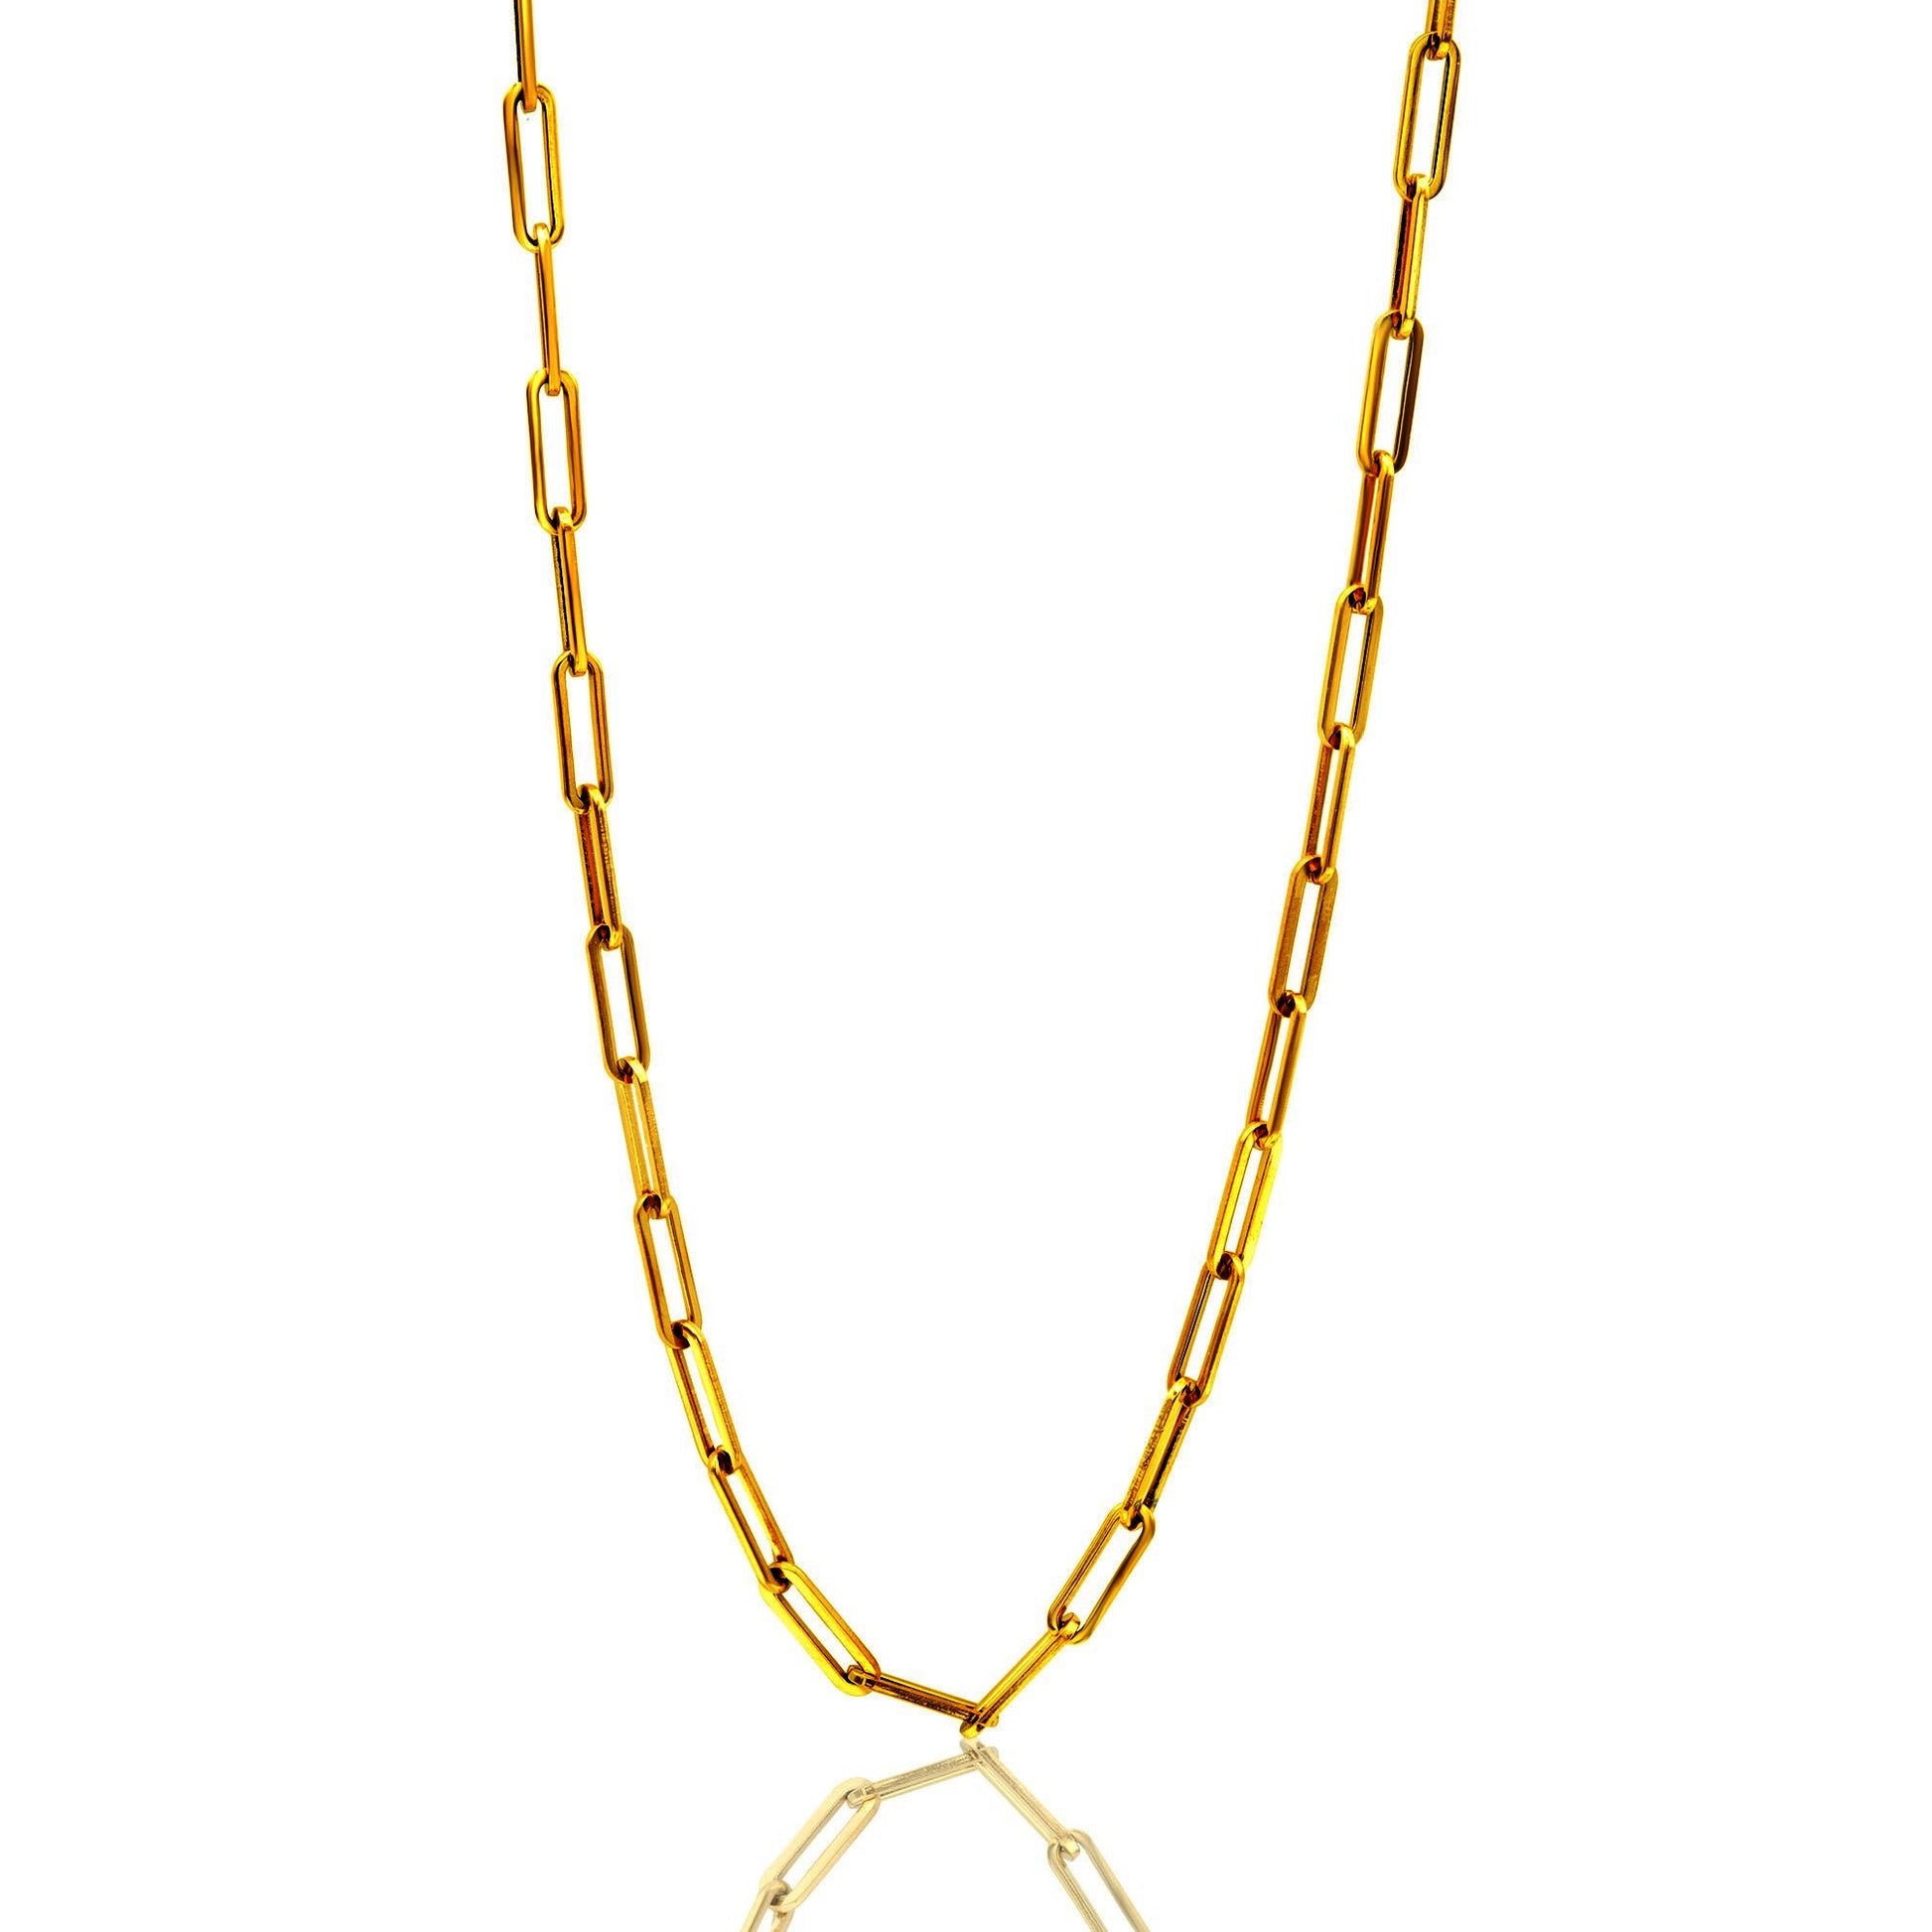 Paper Clip Necklace - Gold Plated - 24"